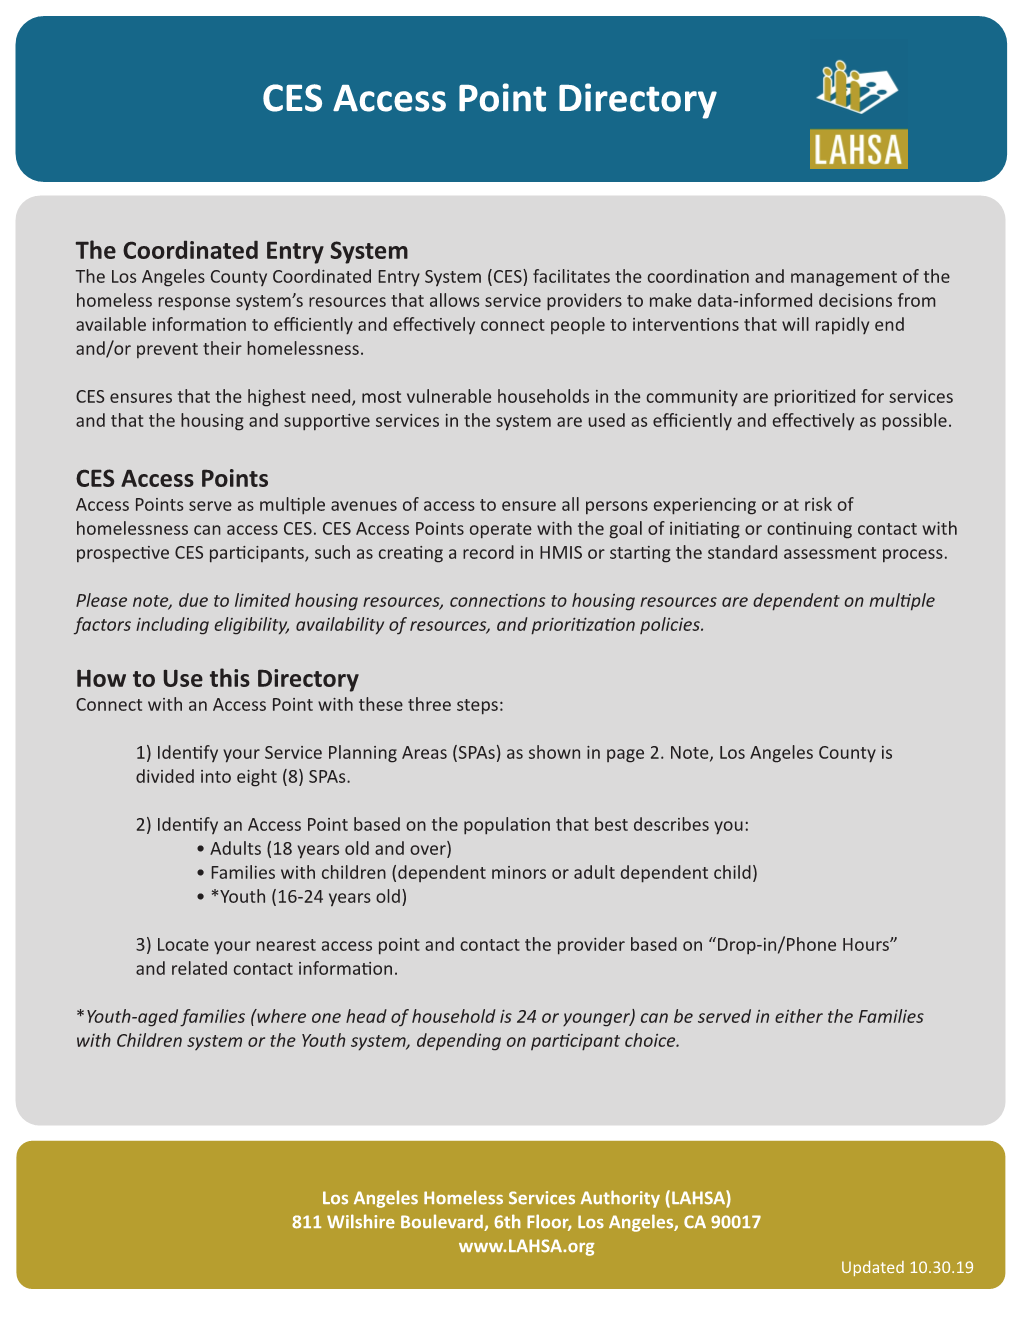 CES Access Point Guide FINALV2 10.30.19